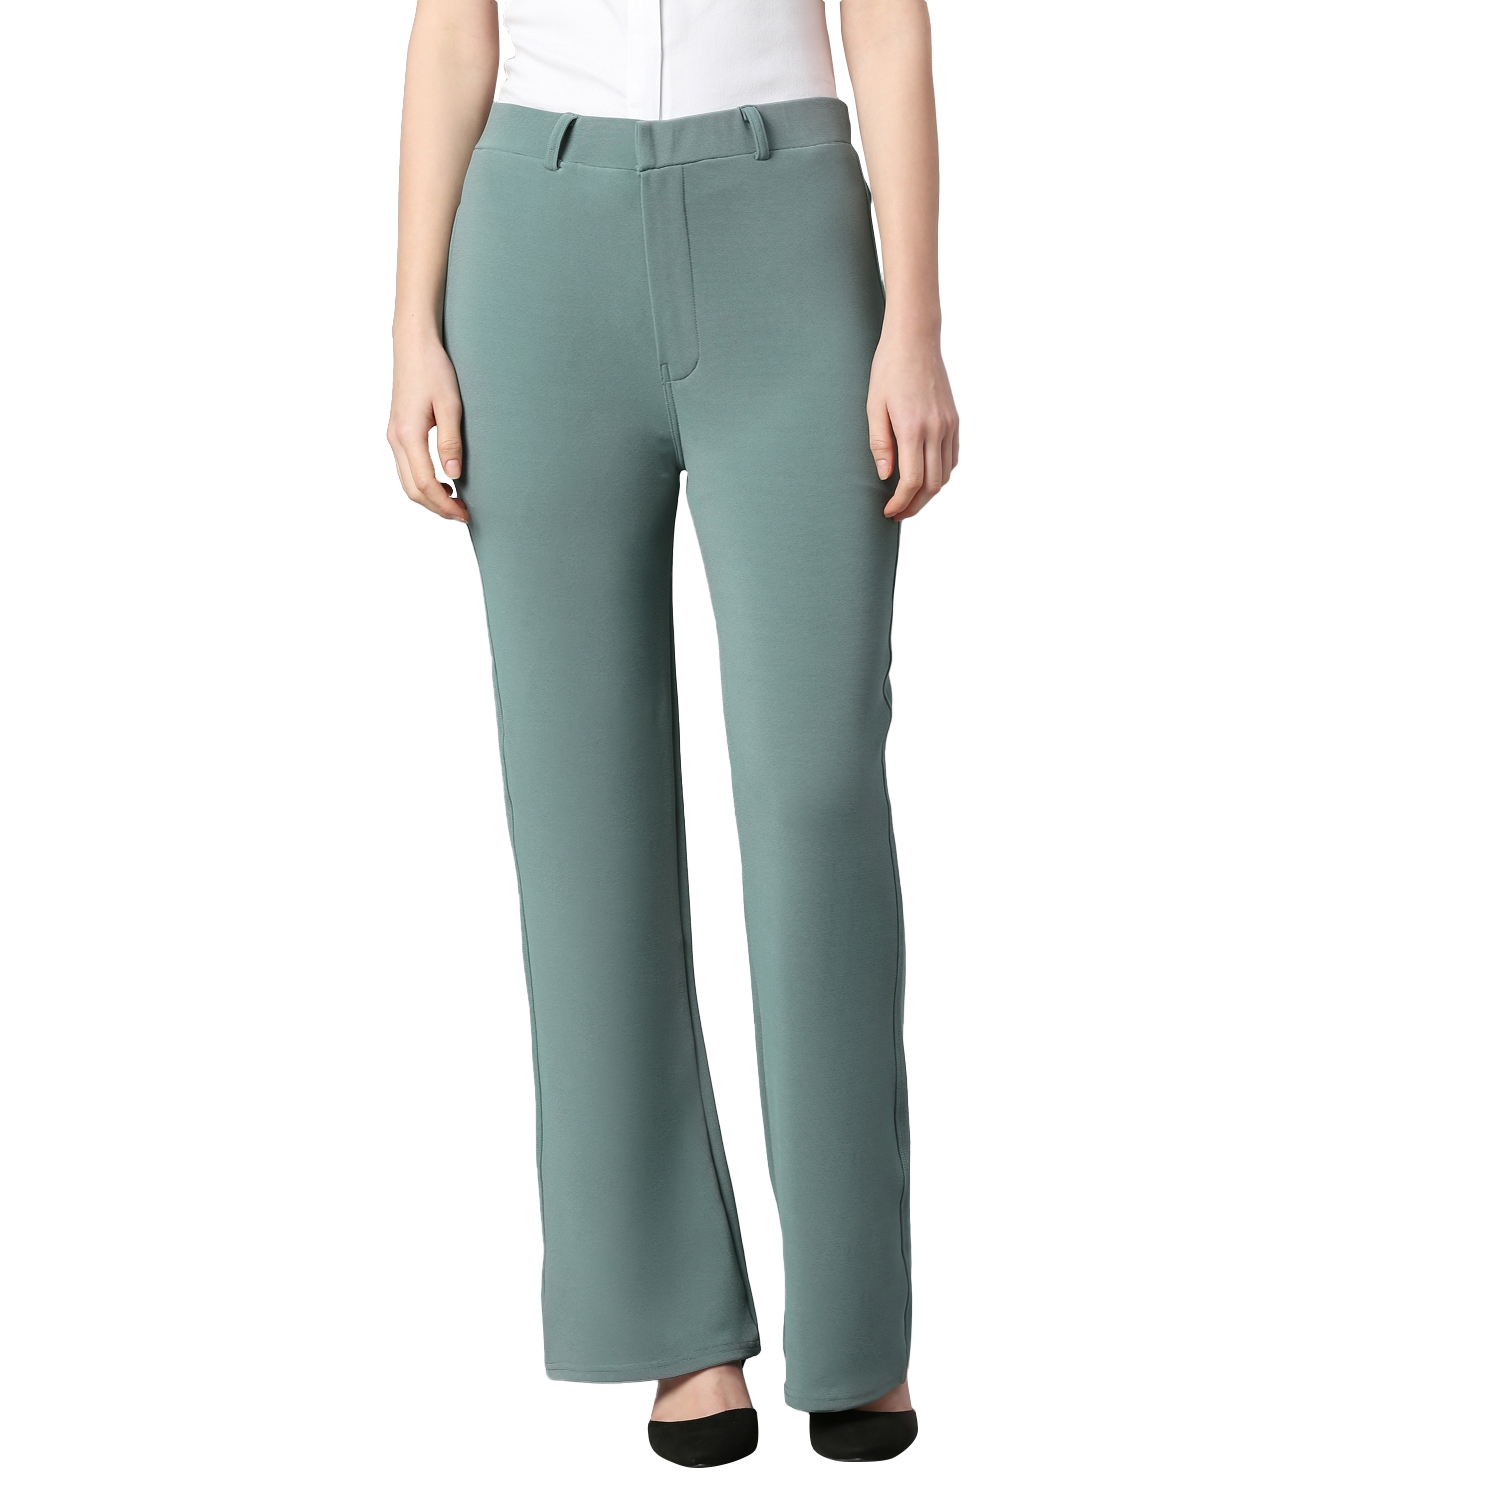 Trousers Chinos: Buy Men Light Beige Cotton Lycra Trousers Chinos Online -  Cliths.com